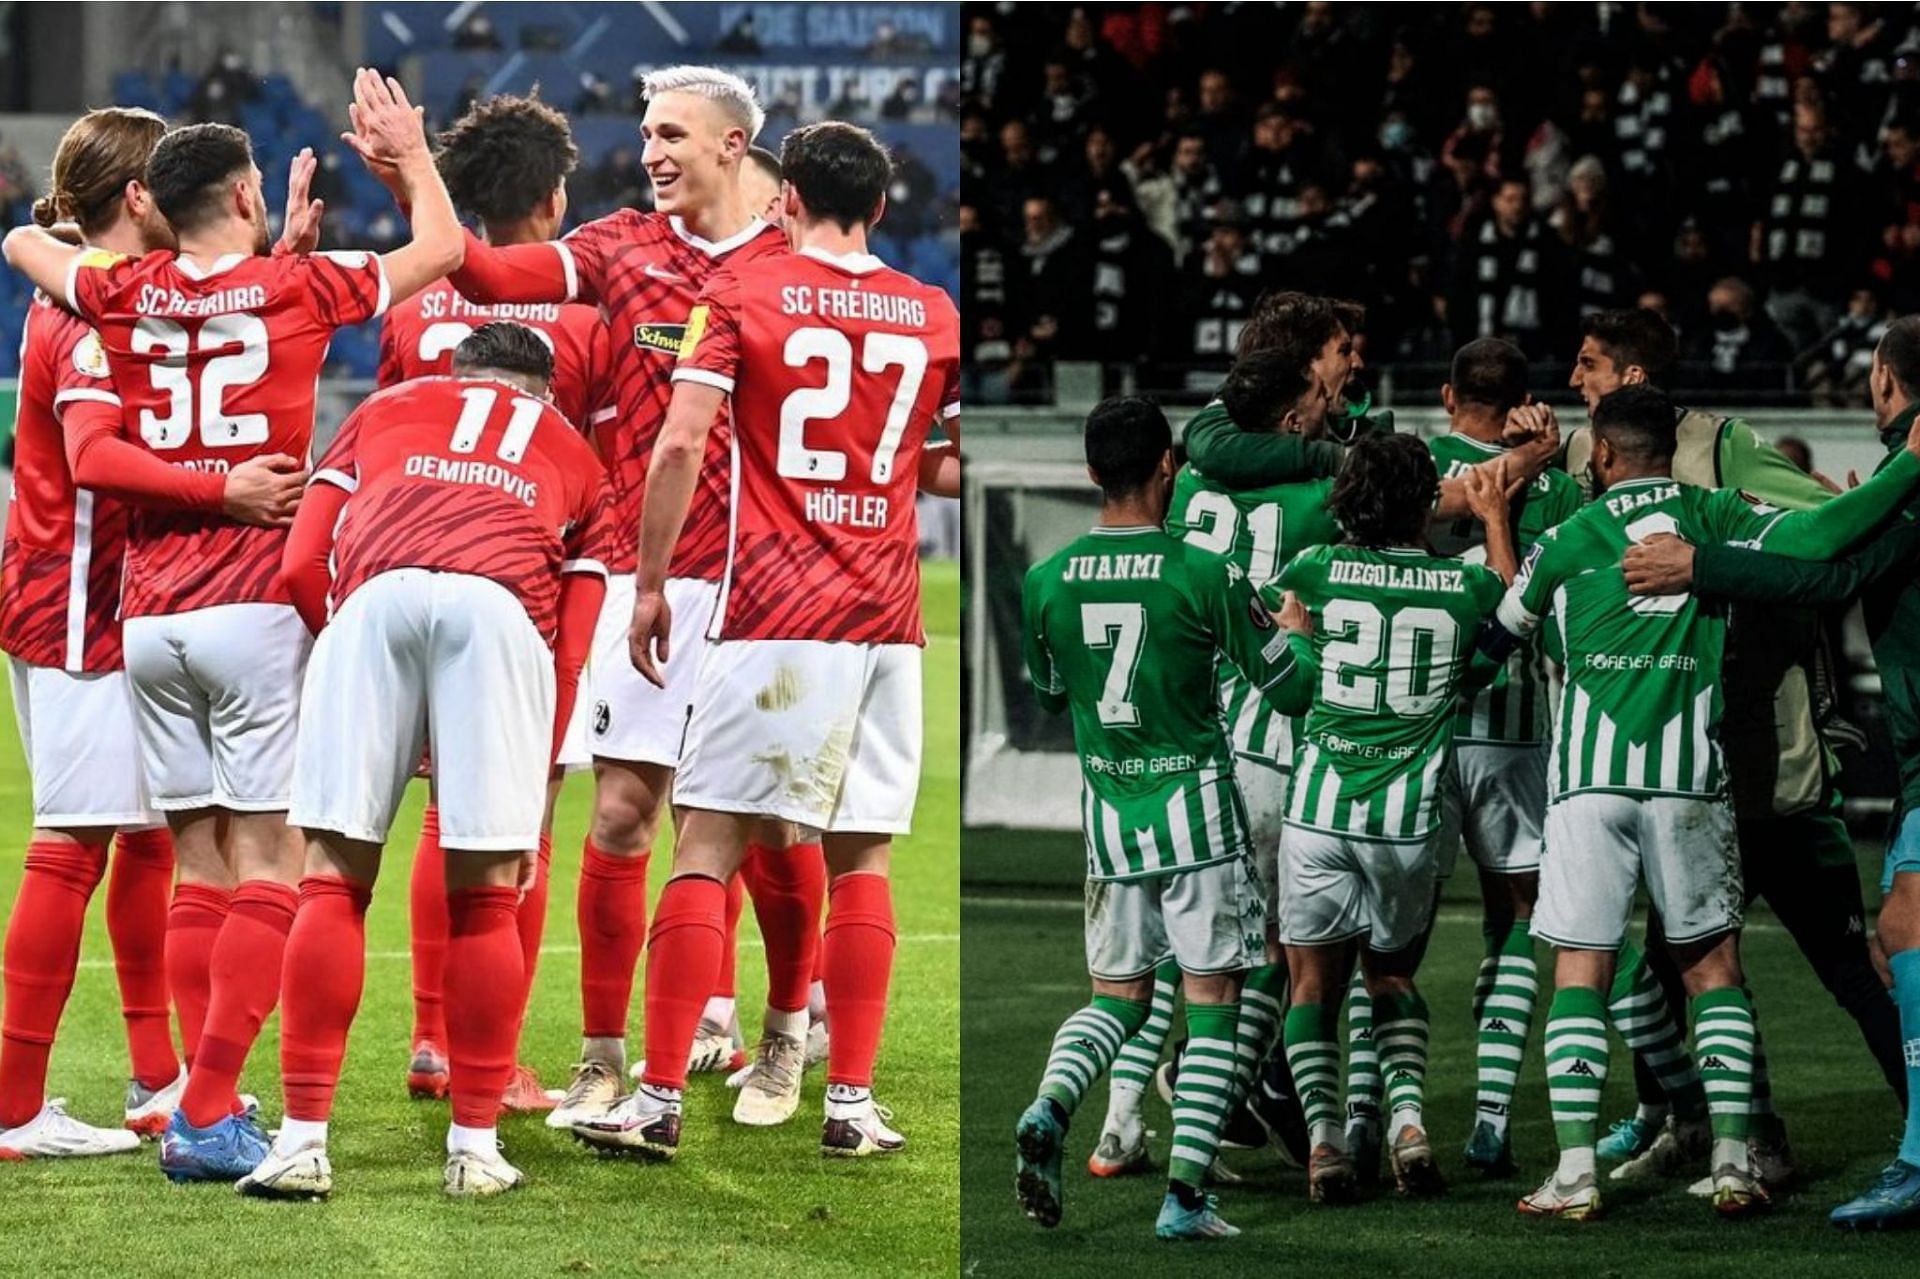 SC Freiburg (L) and Real Betis (R) have been two of the most overachieving clubs this season